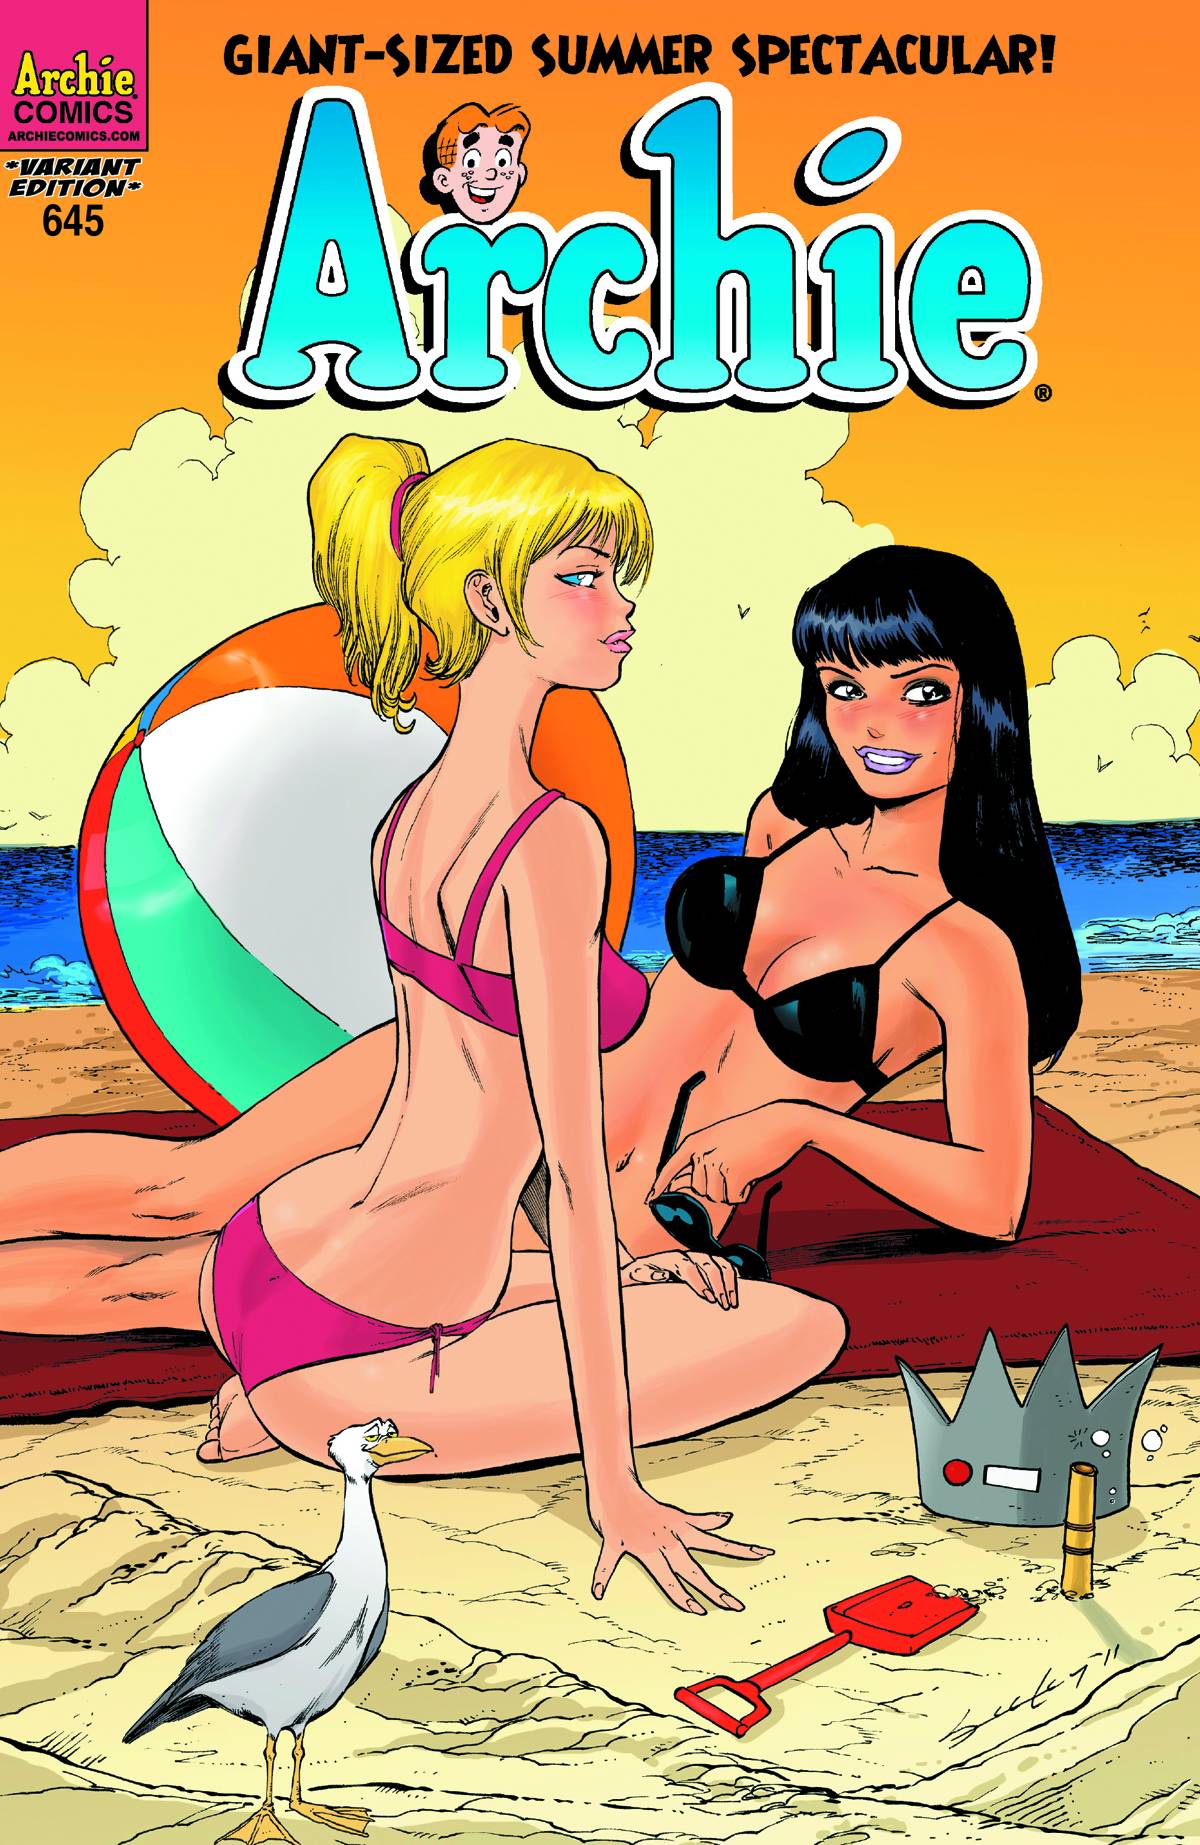 Archie #645 Tim Seeley Variant Cover